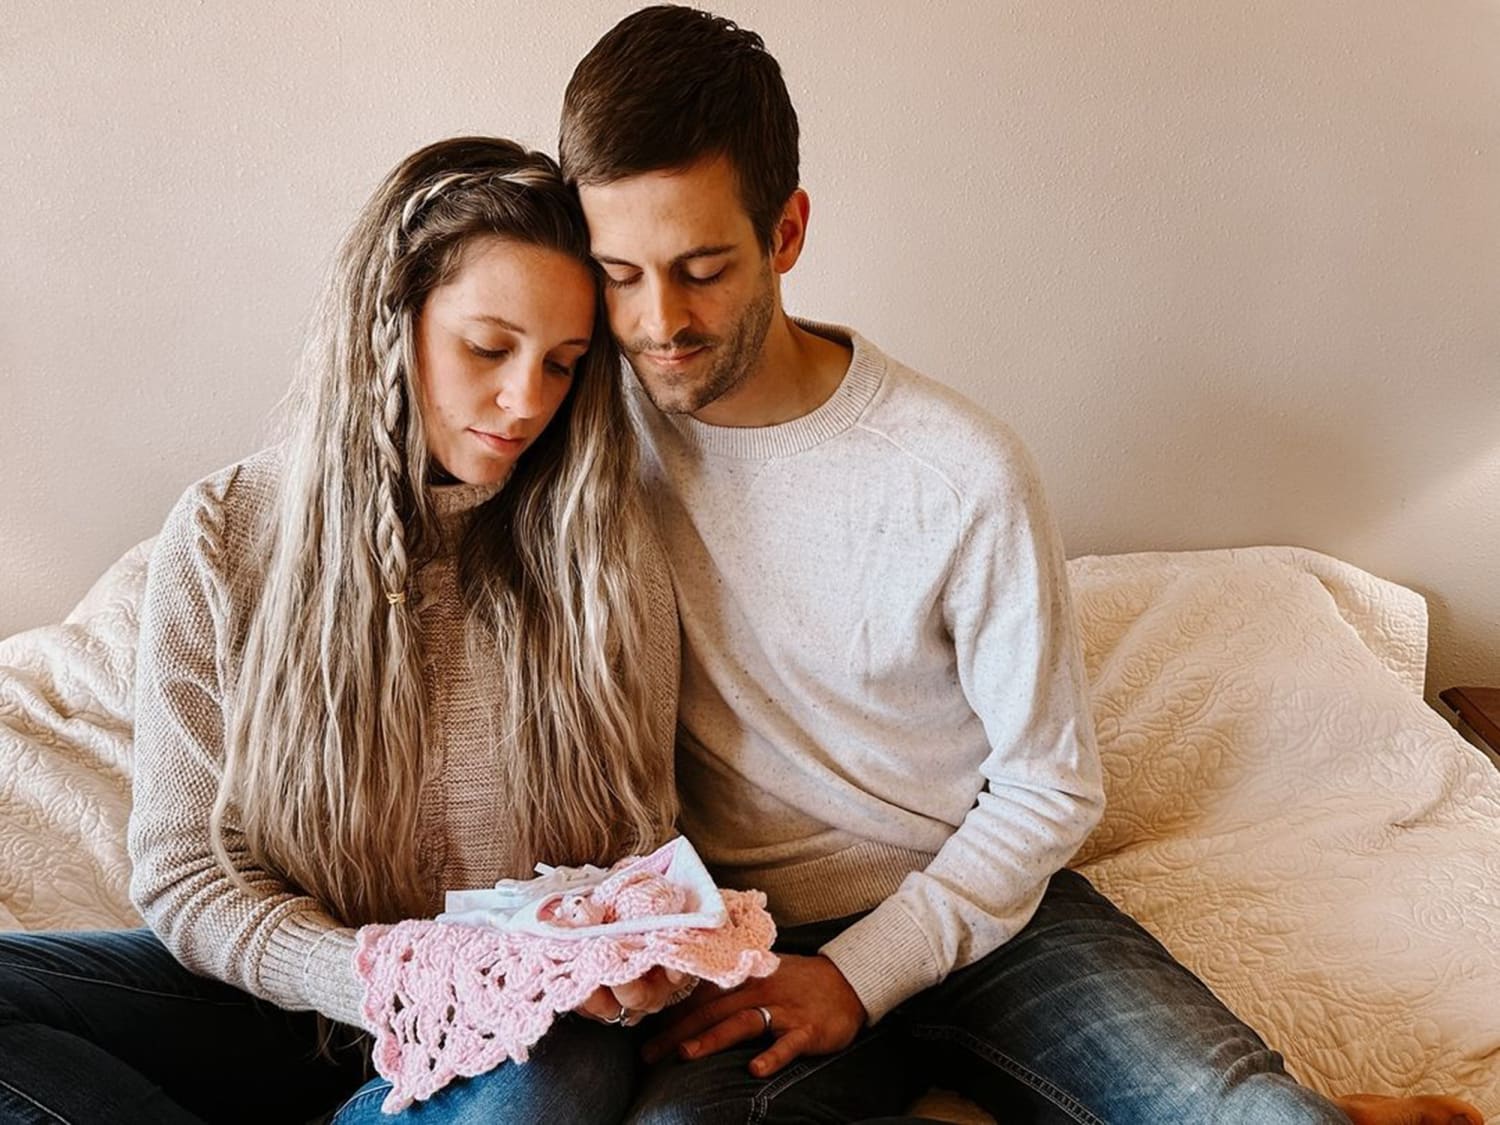 Jill and Derick Dillard hold funeral for their baby girl who died in utero